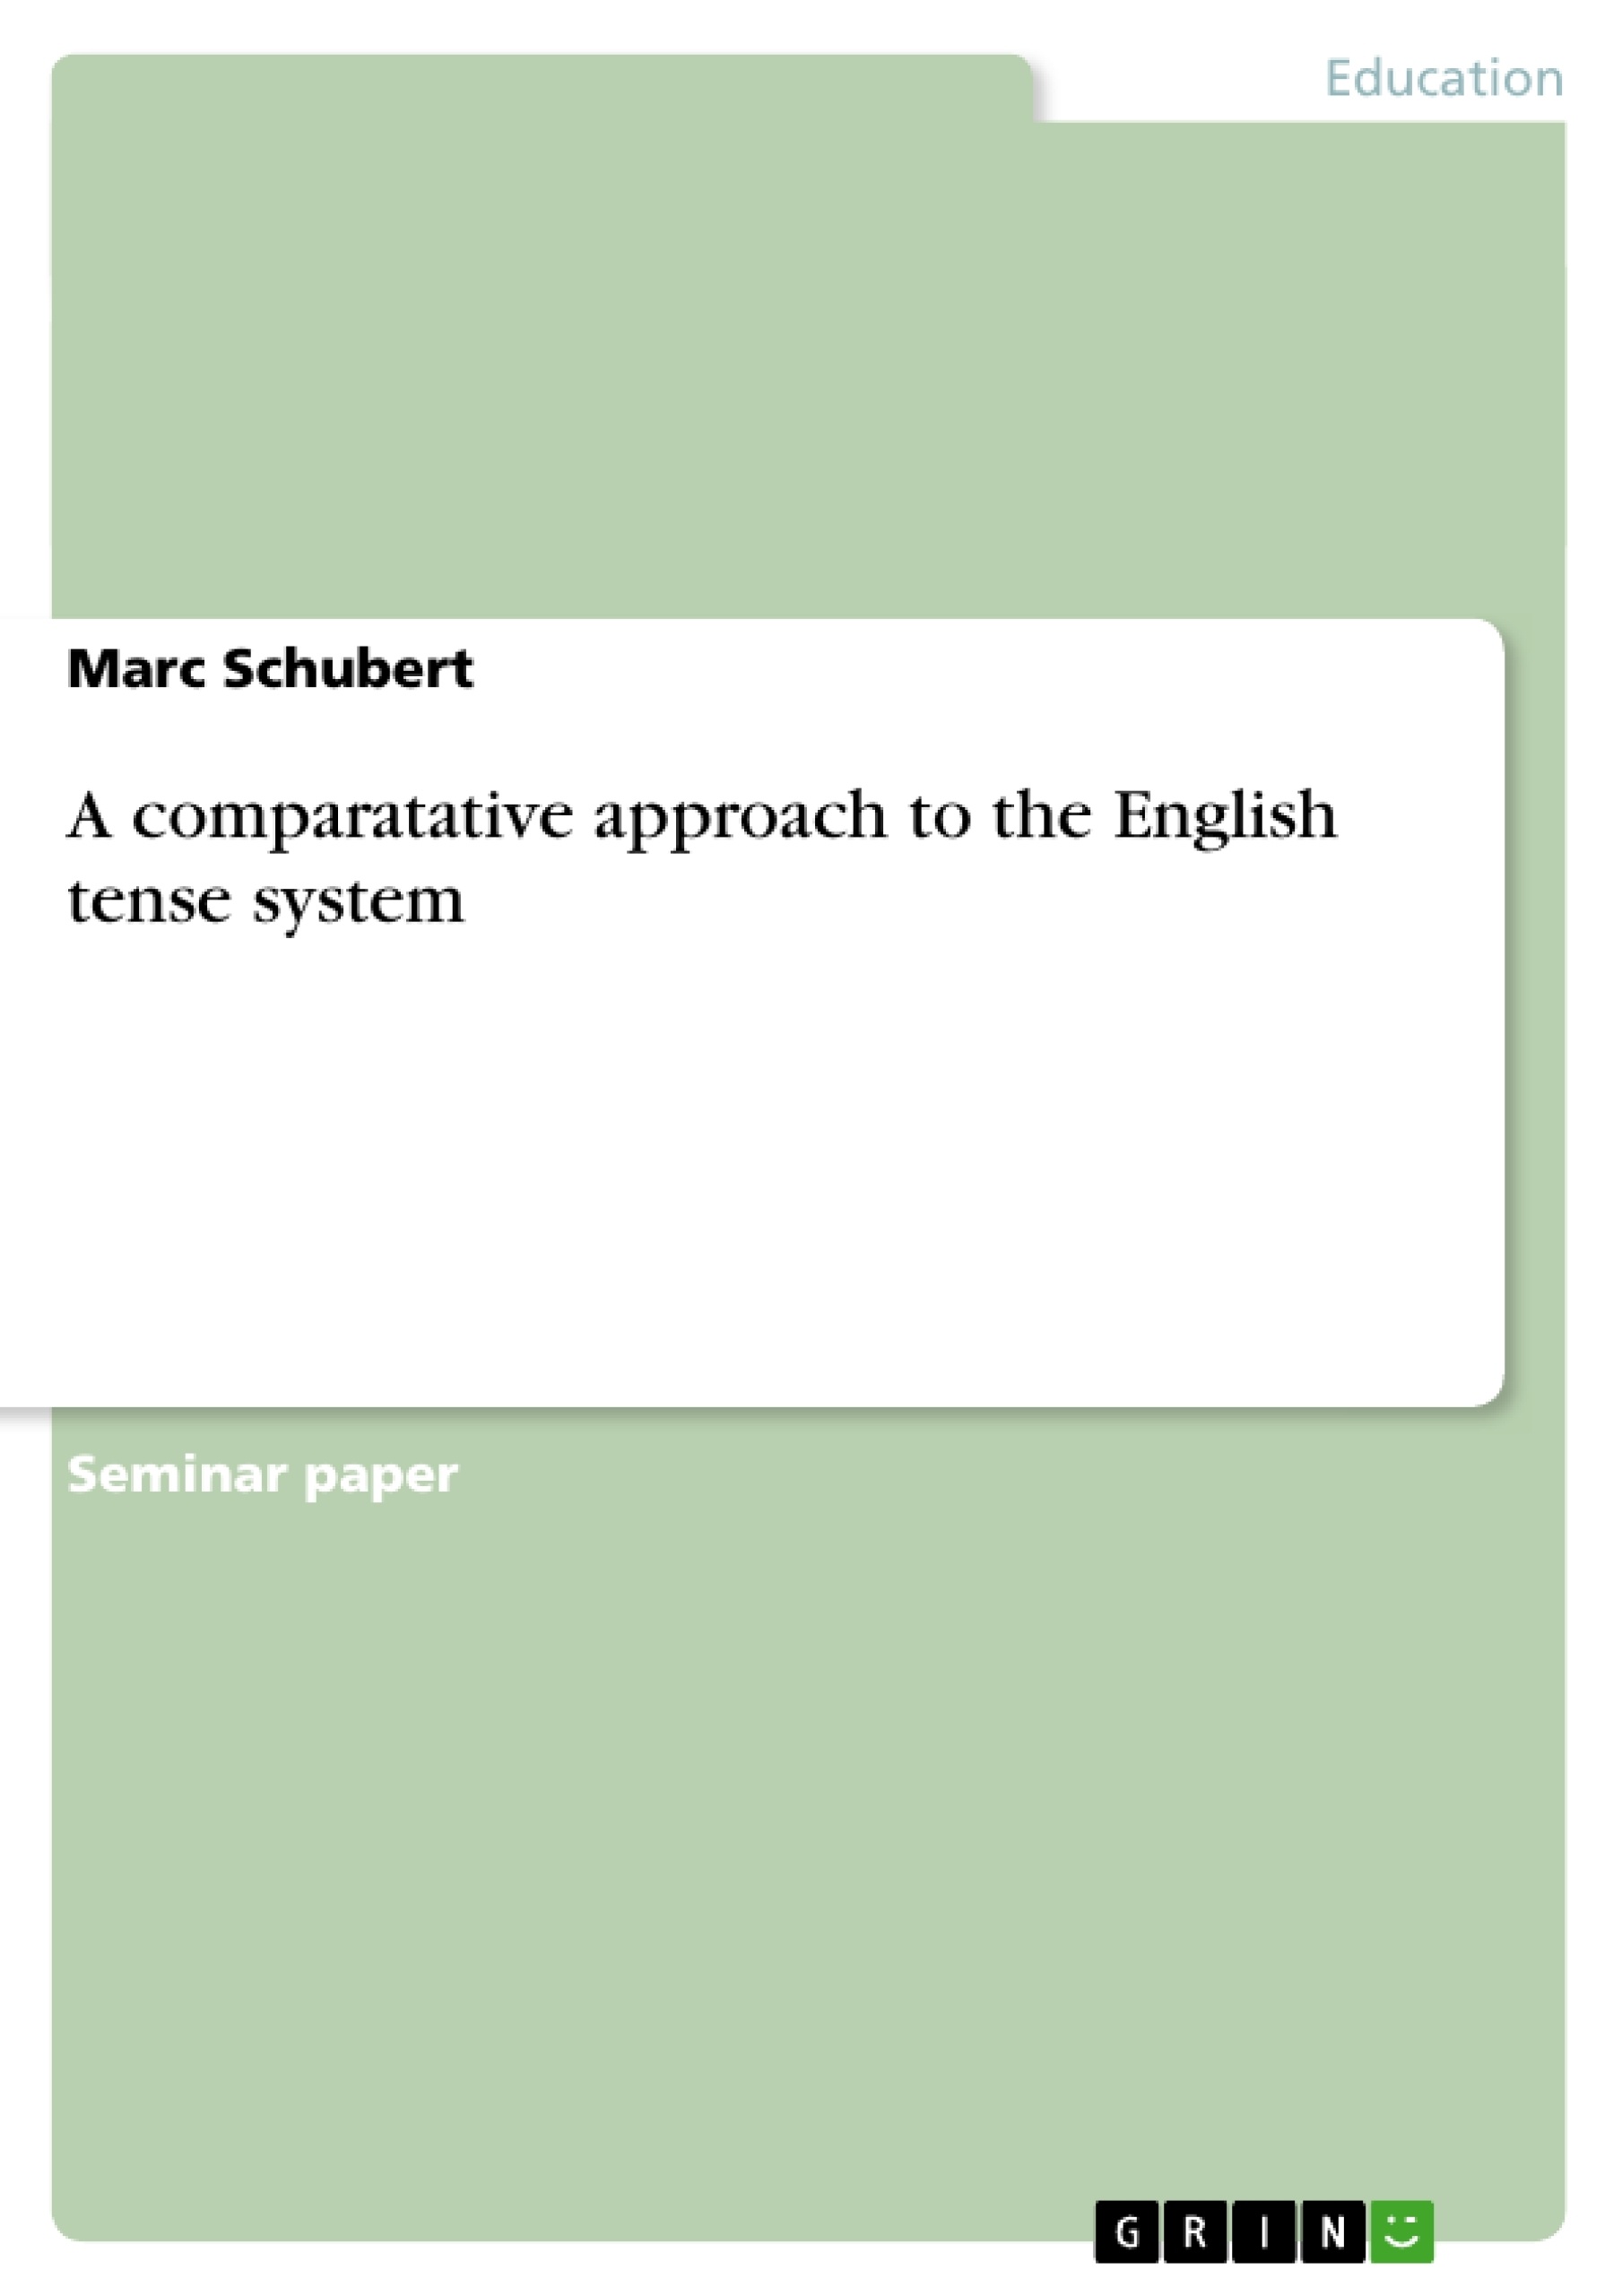 Title: A comparatative approach to the English tense system